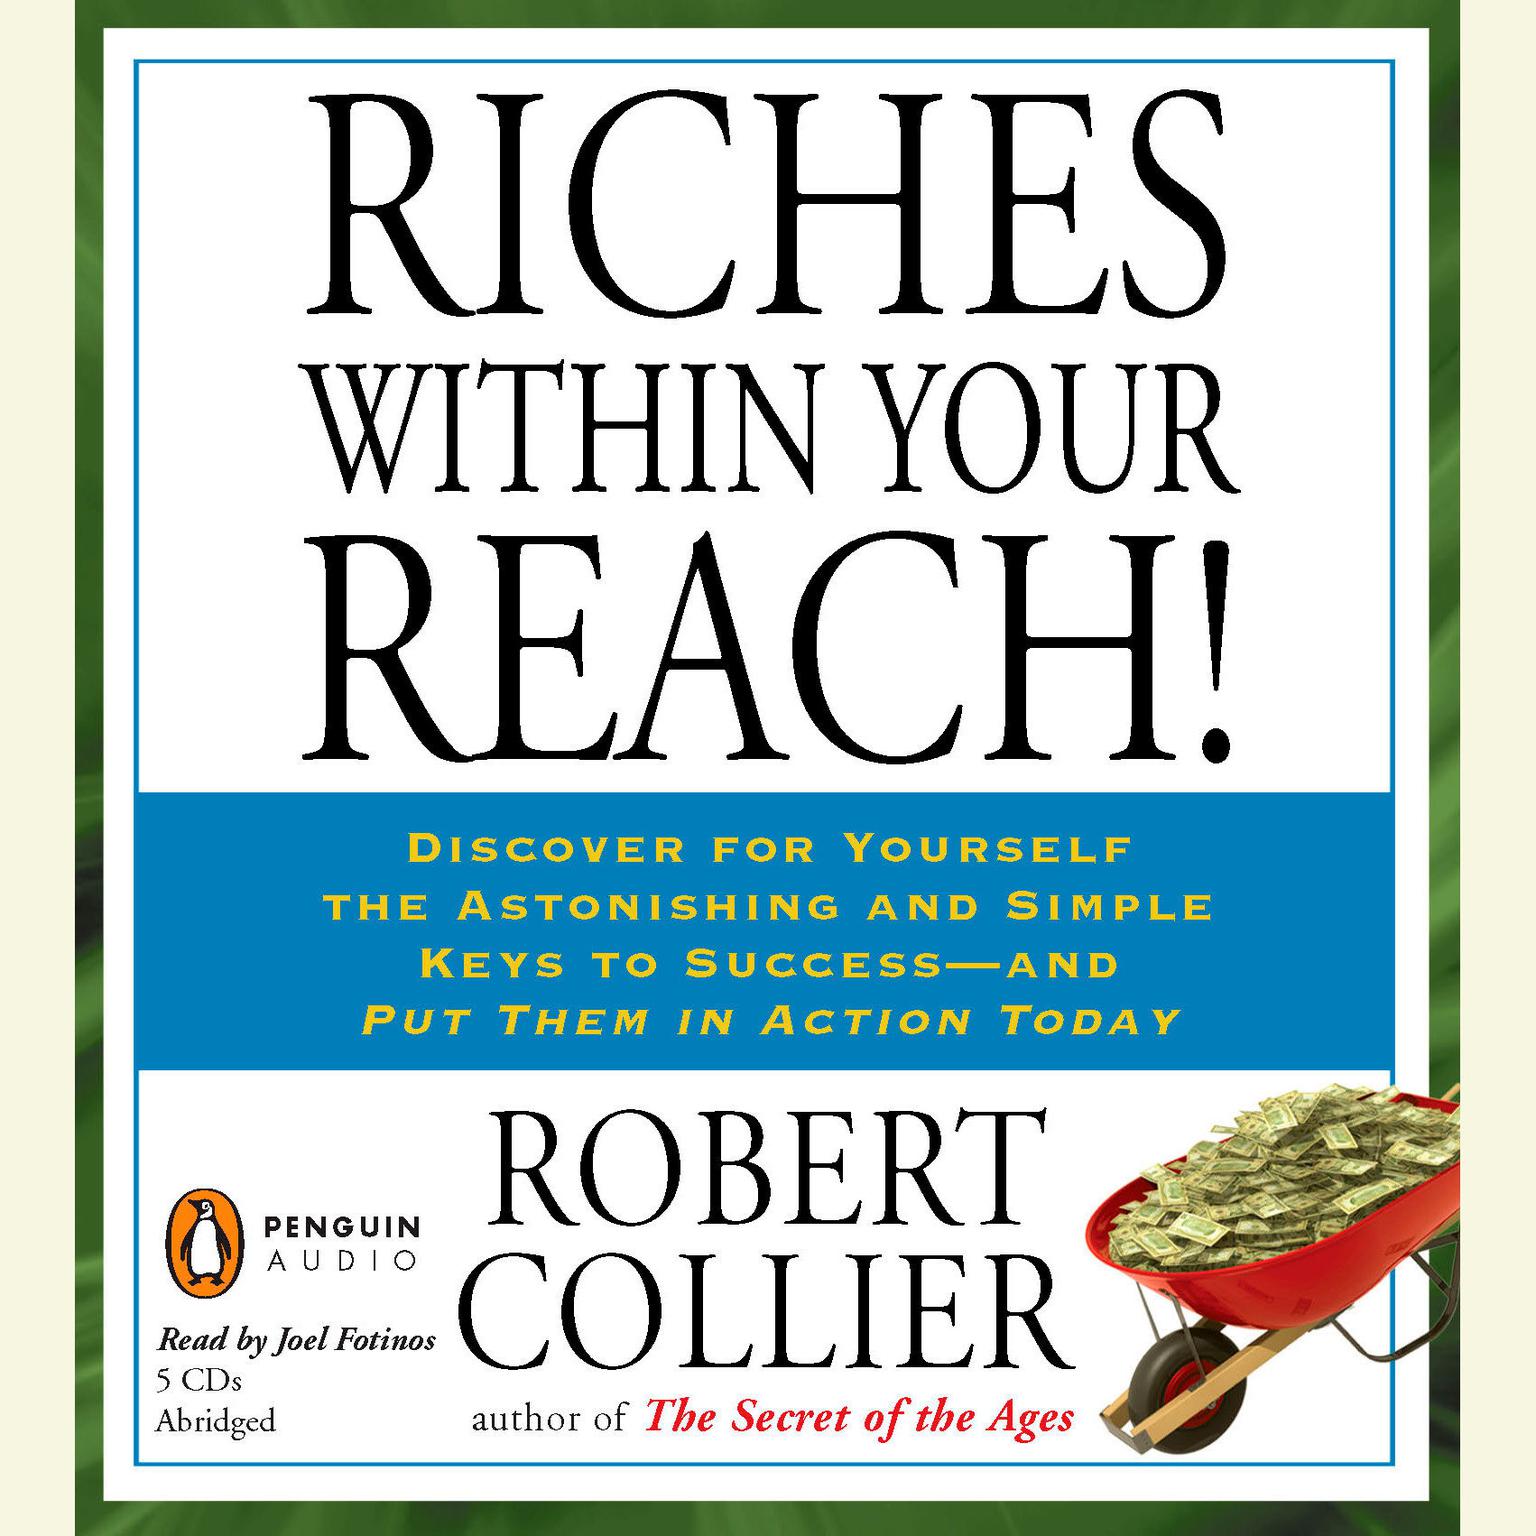 Riches Within Your Reach! (Abridged) Audiobook, by Robert Collier